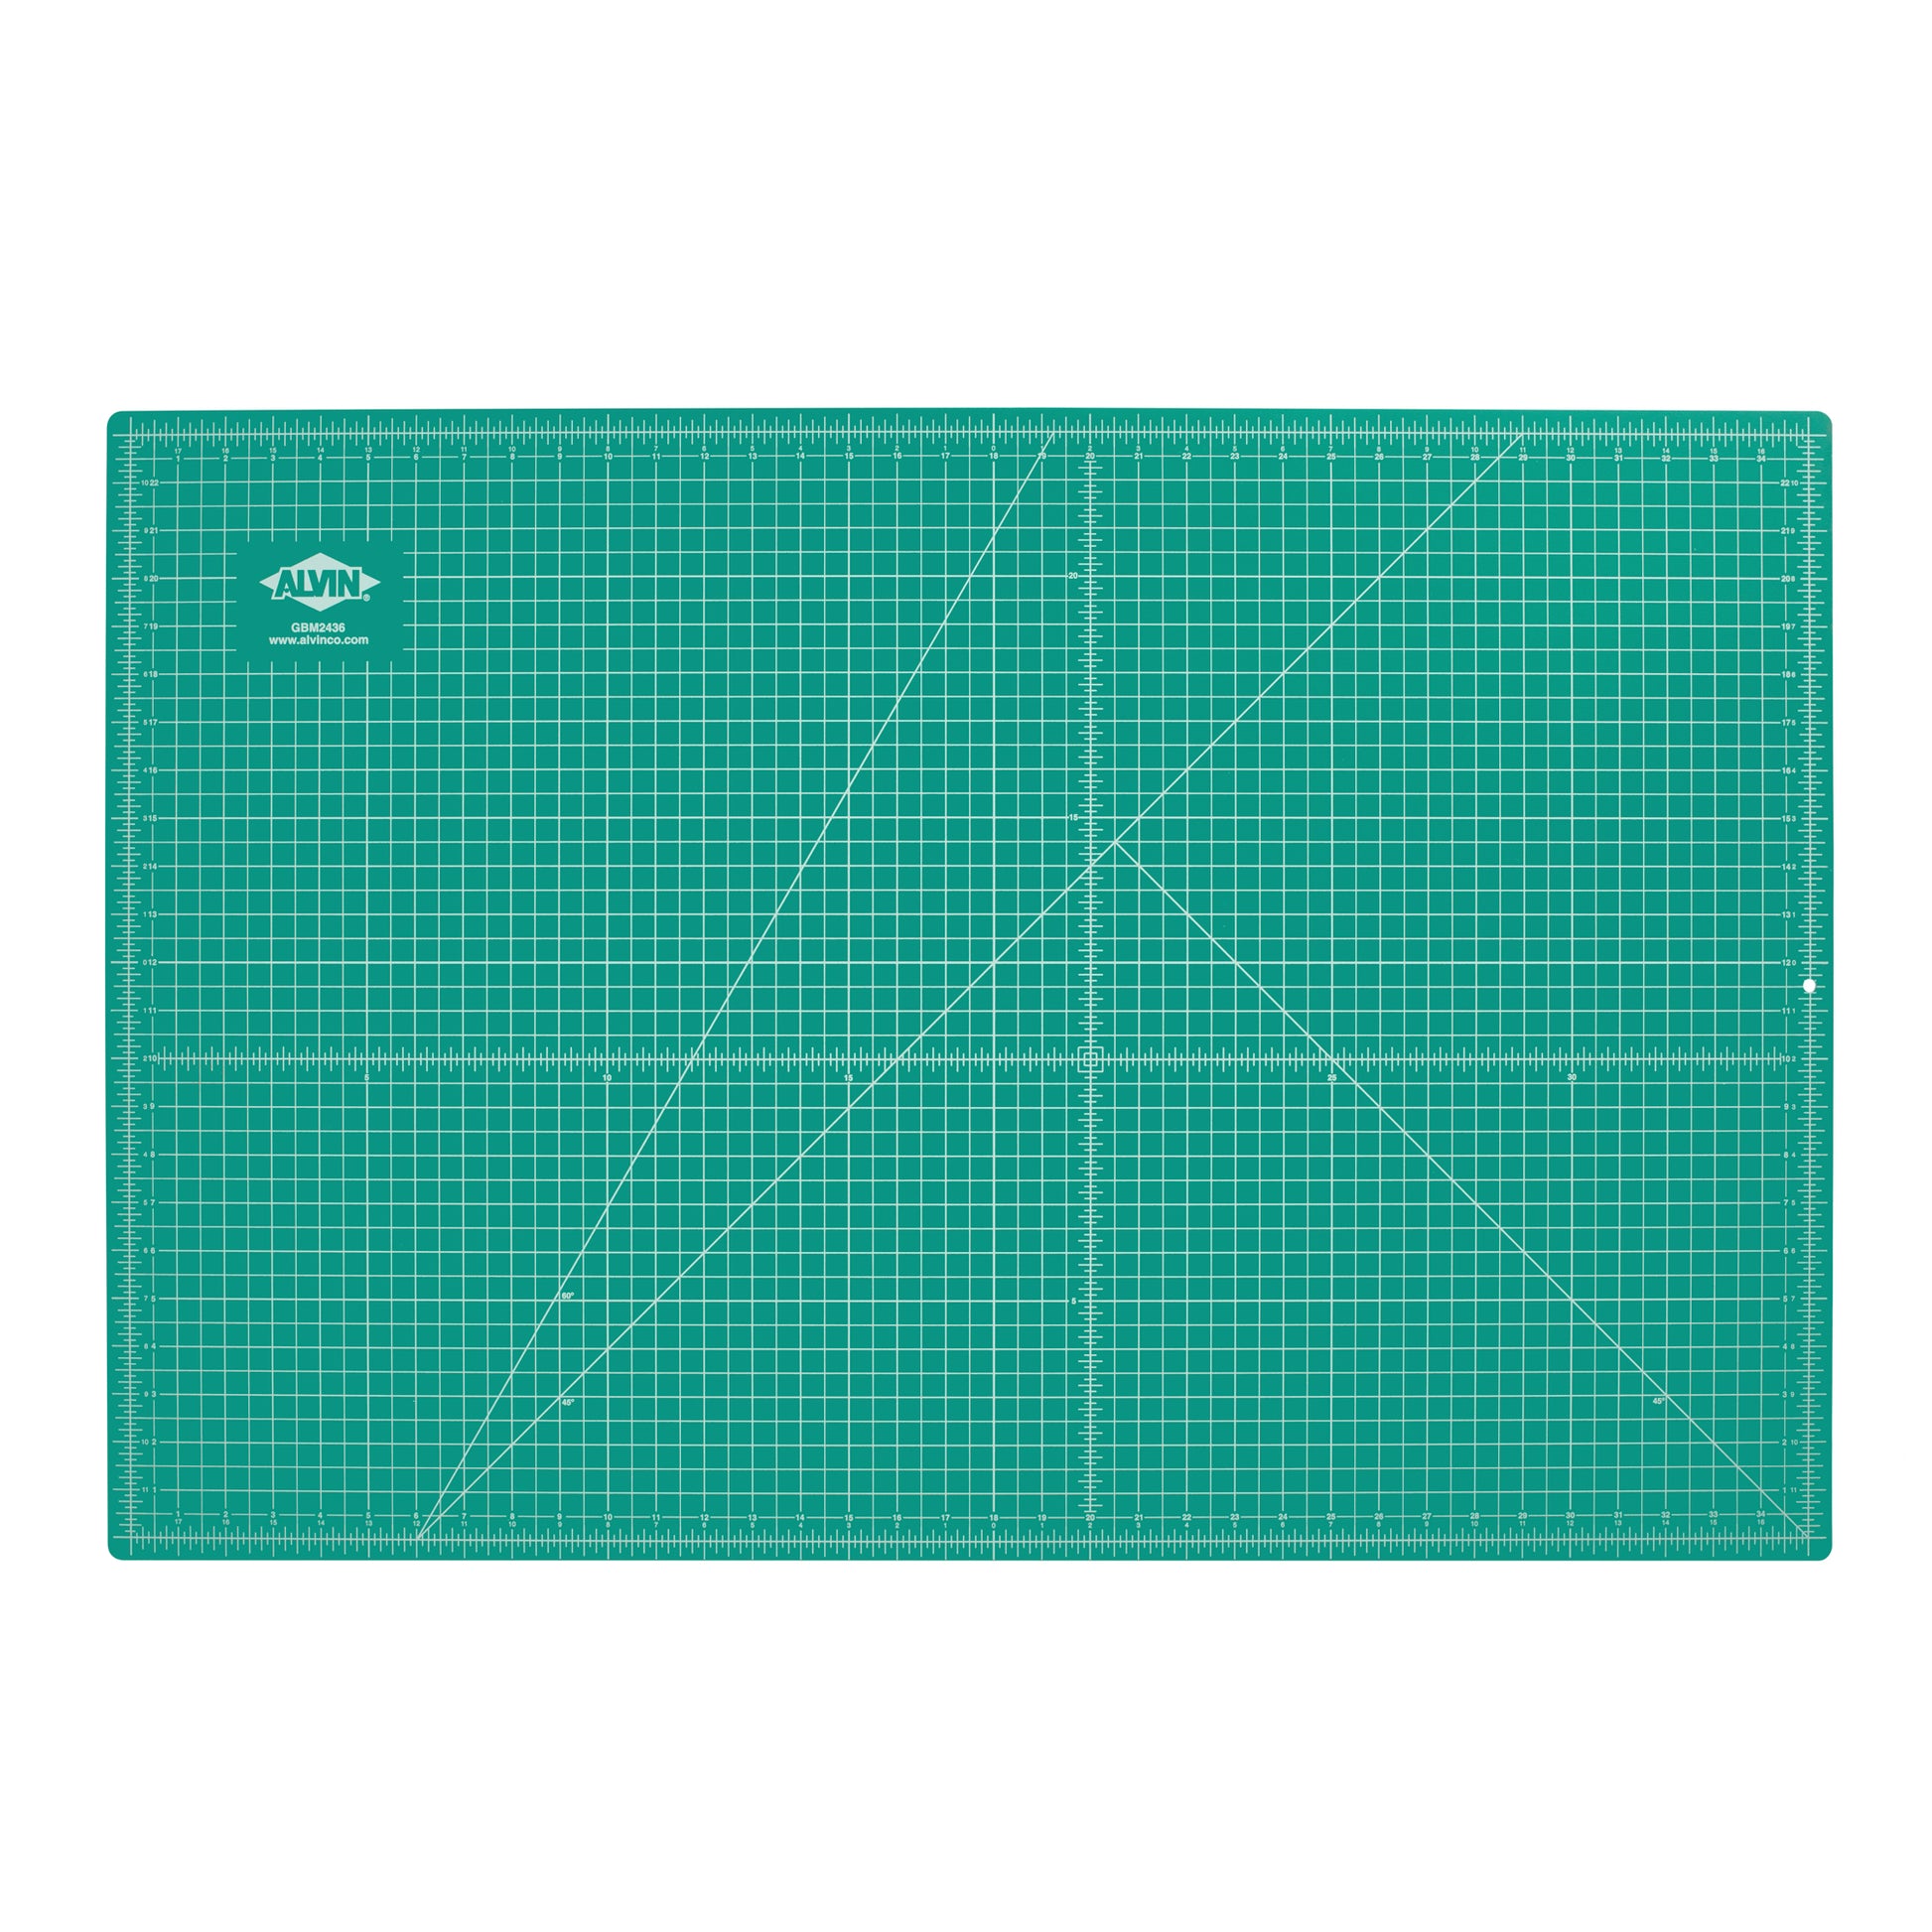  ALVIN, GBM Series Professional Self-Healing Cutting Mat,  Green/Black Double-Sided, Gridded Rotary Cutting Board for Crafts, Sewing,  Fabric - 24 x 36 inches : Arts, Crafts & Sewing